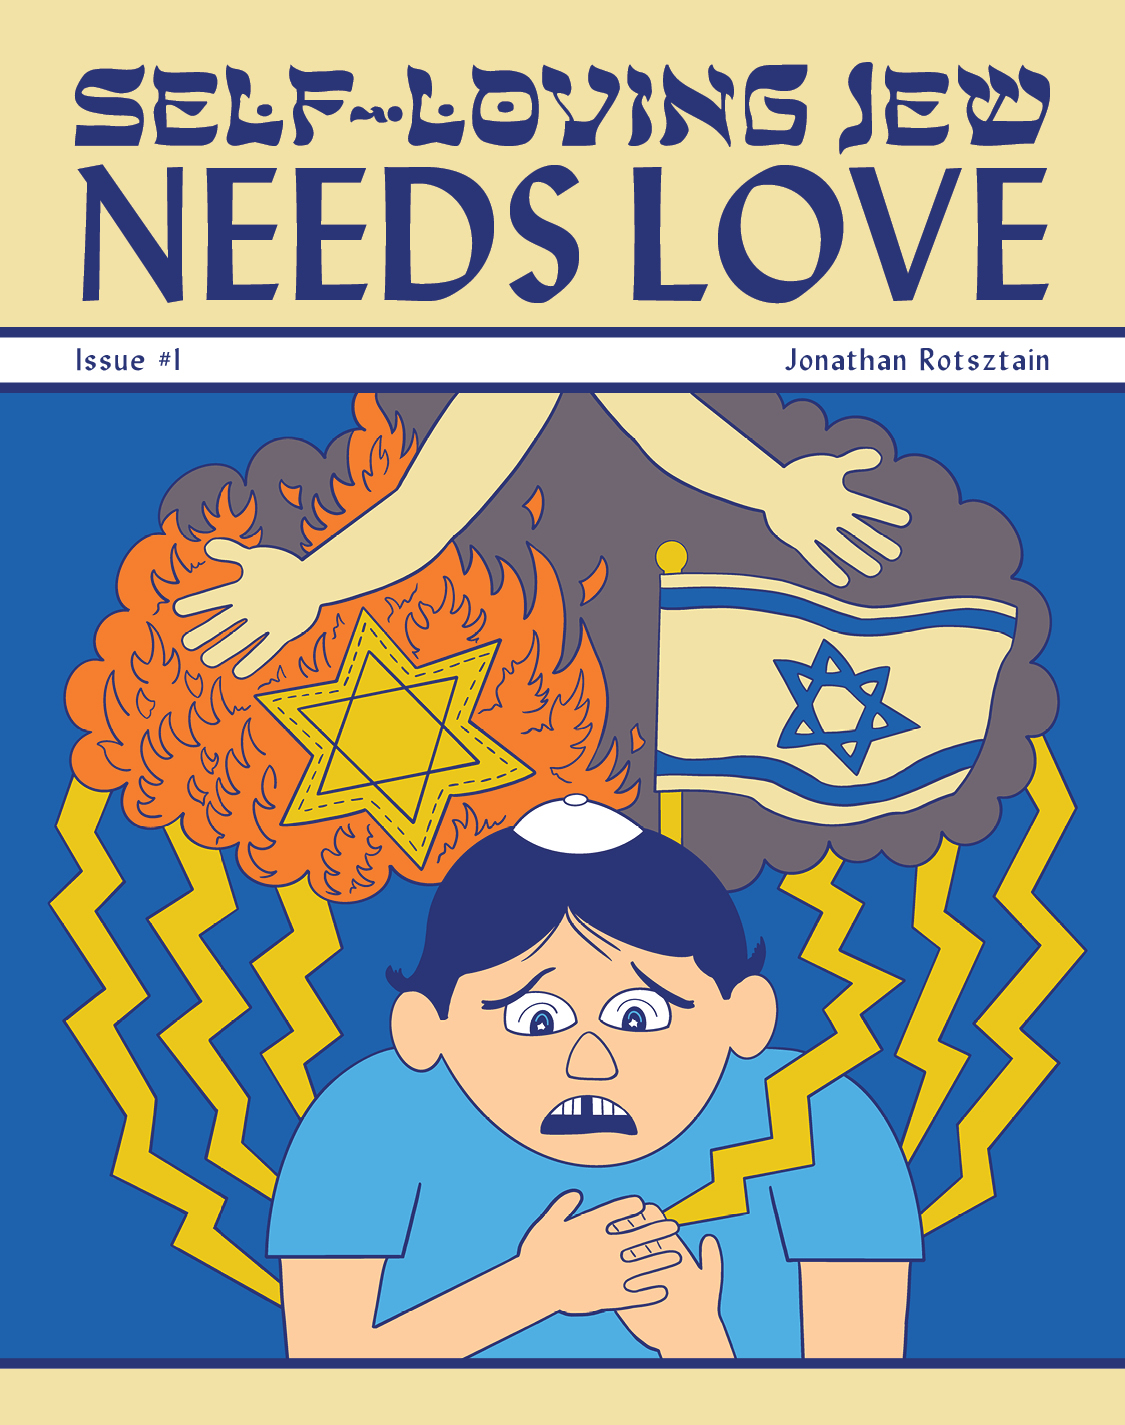 Self-Loving Jew Needs Love Issue Number 1. Illustration of young Jonathan wearing a kippah clutching his heart as six bolts of lightning strike him from a cloud with a Holocaust yellow Star of David and flag of Israel in it.